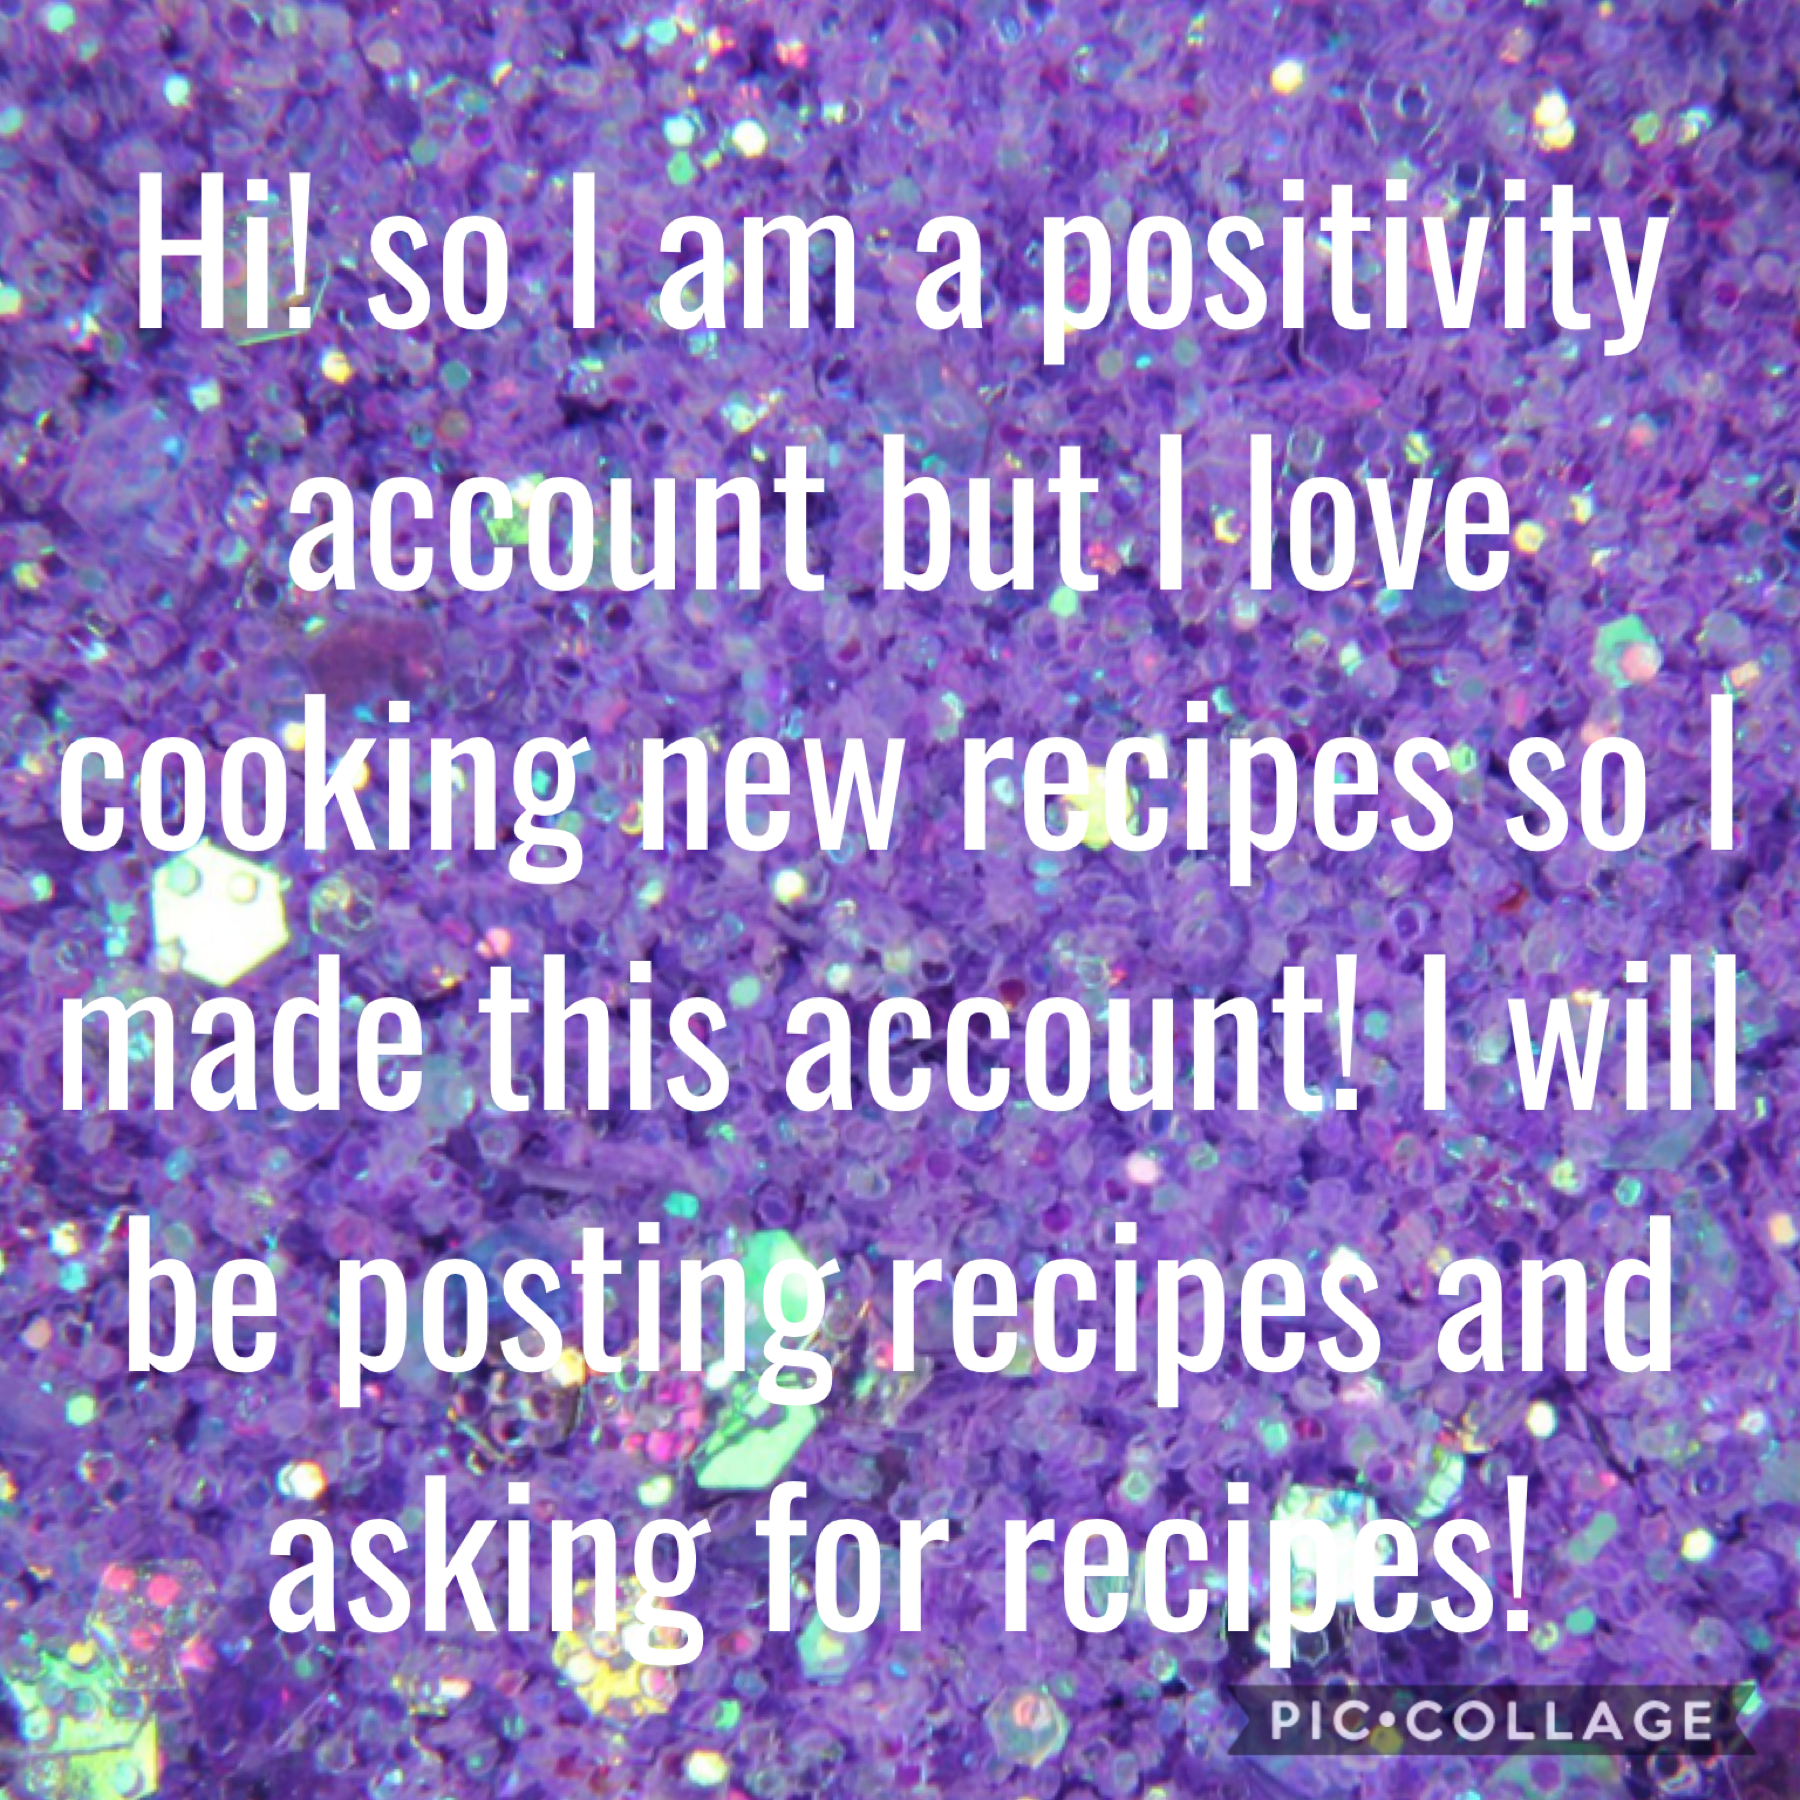 So please comment or remix some recipes I should do and I will tell you how they taste and what to add to the recipe.